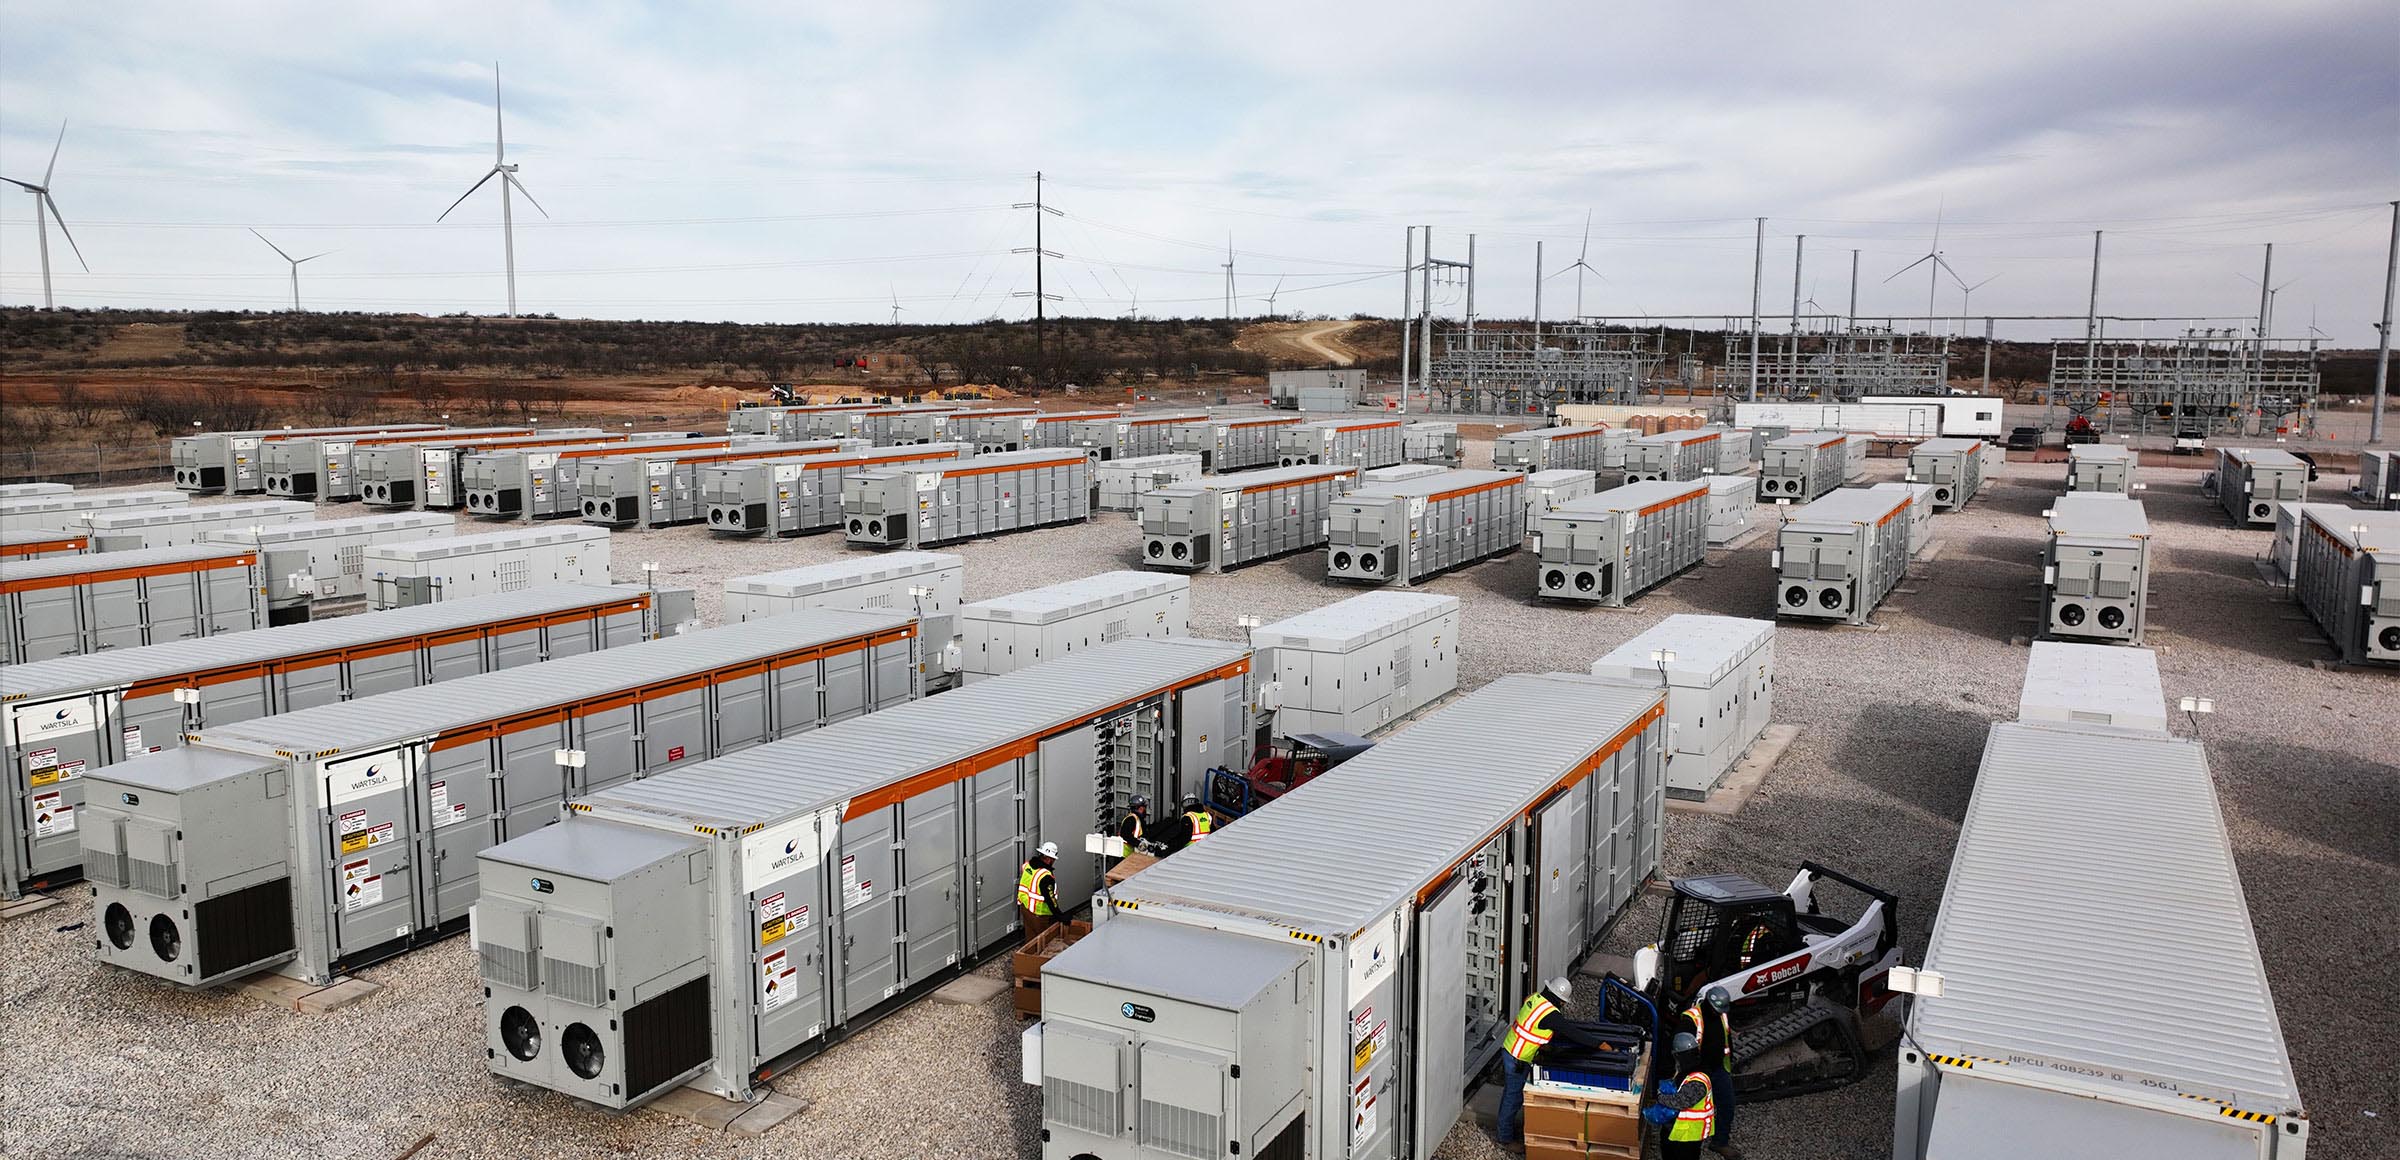 Enel Group launches its first energy storage system in Canada